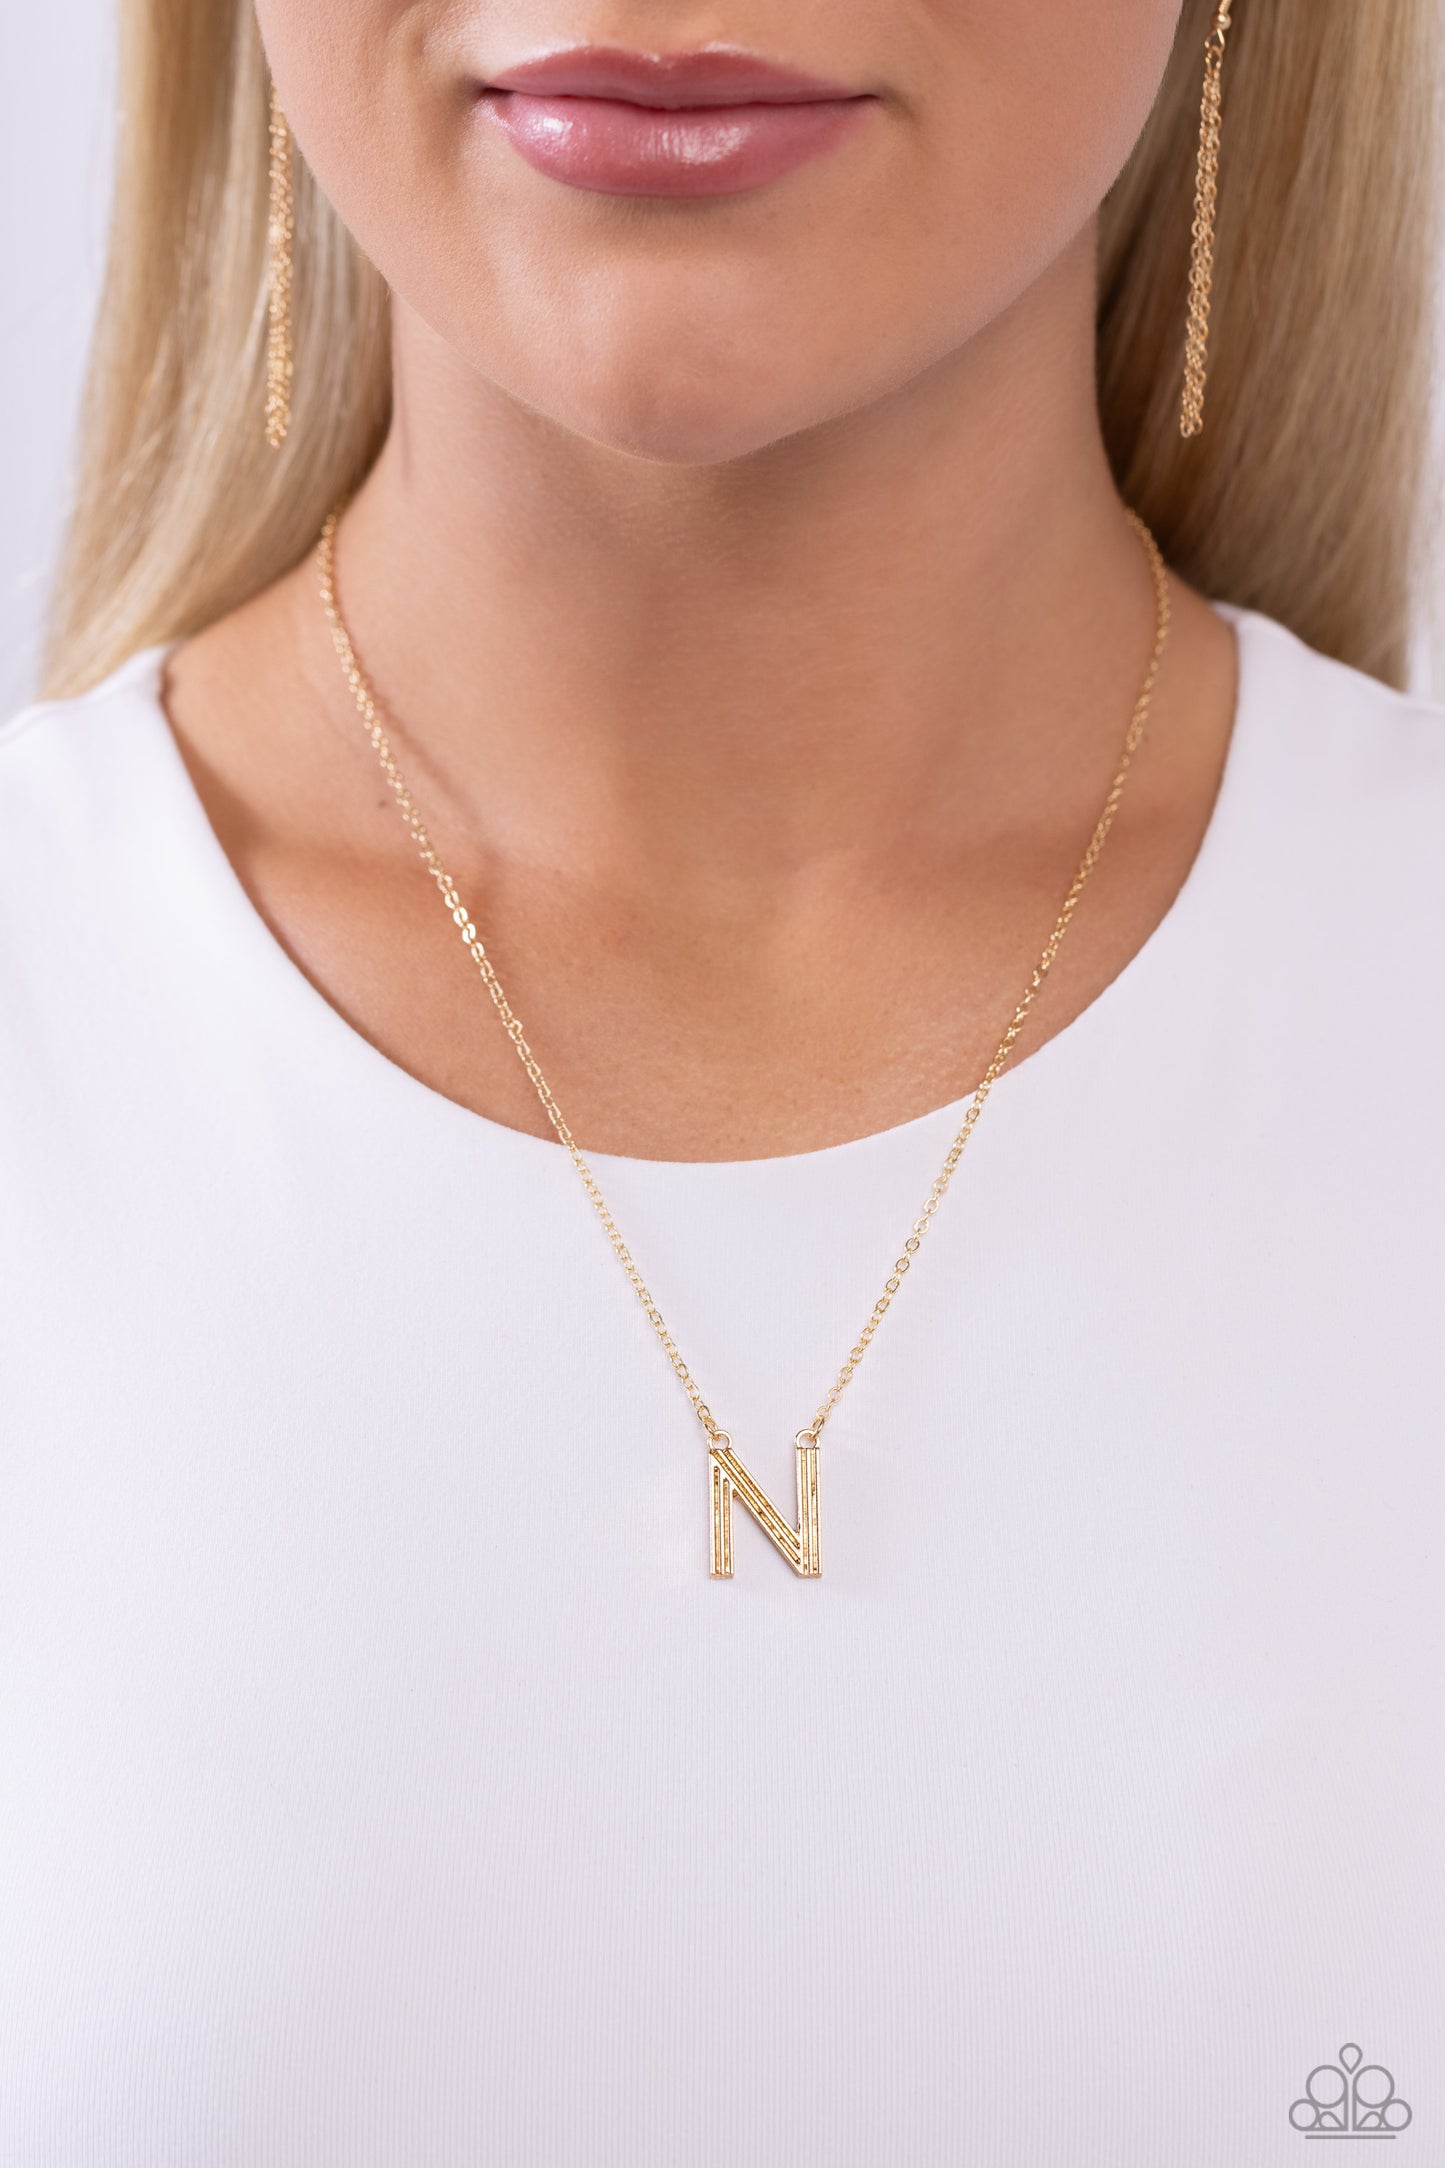 Leave Your Initials Gold * N * Necklace Paparazzi